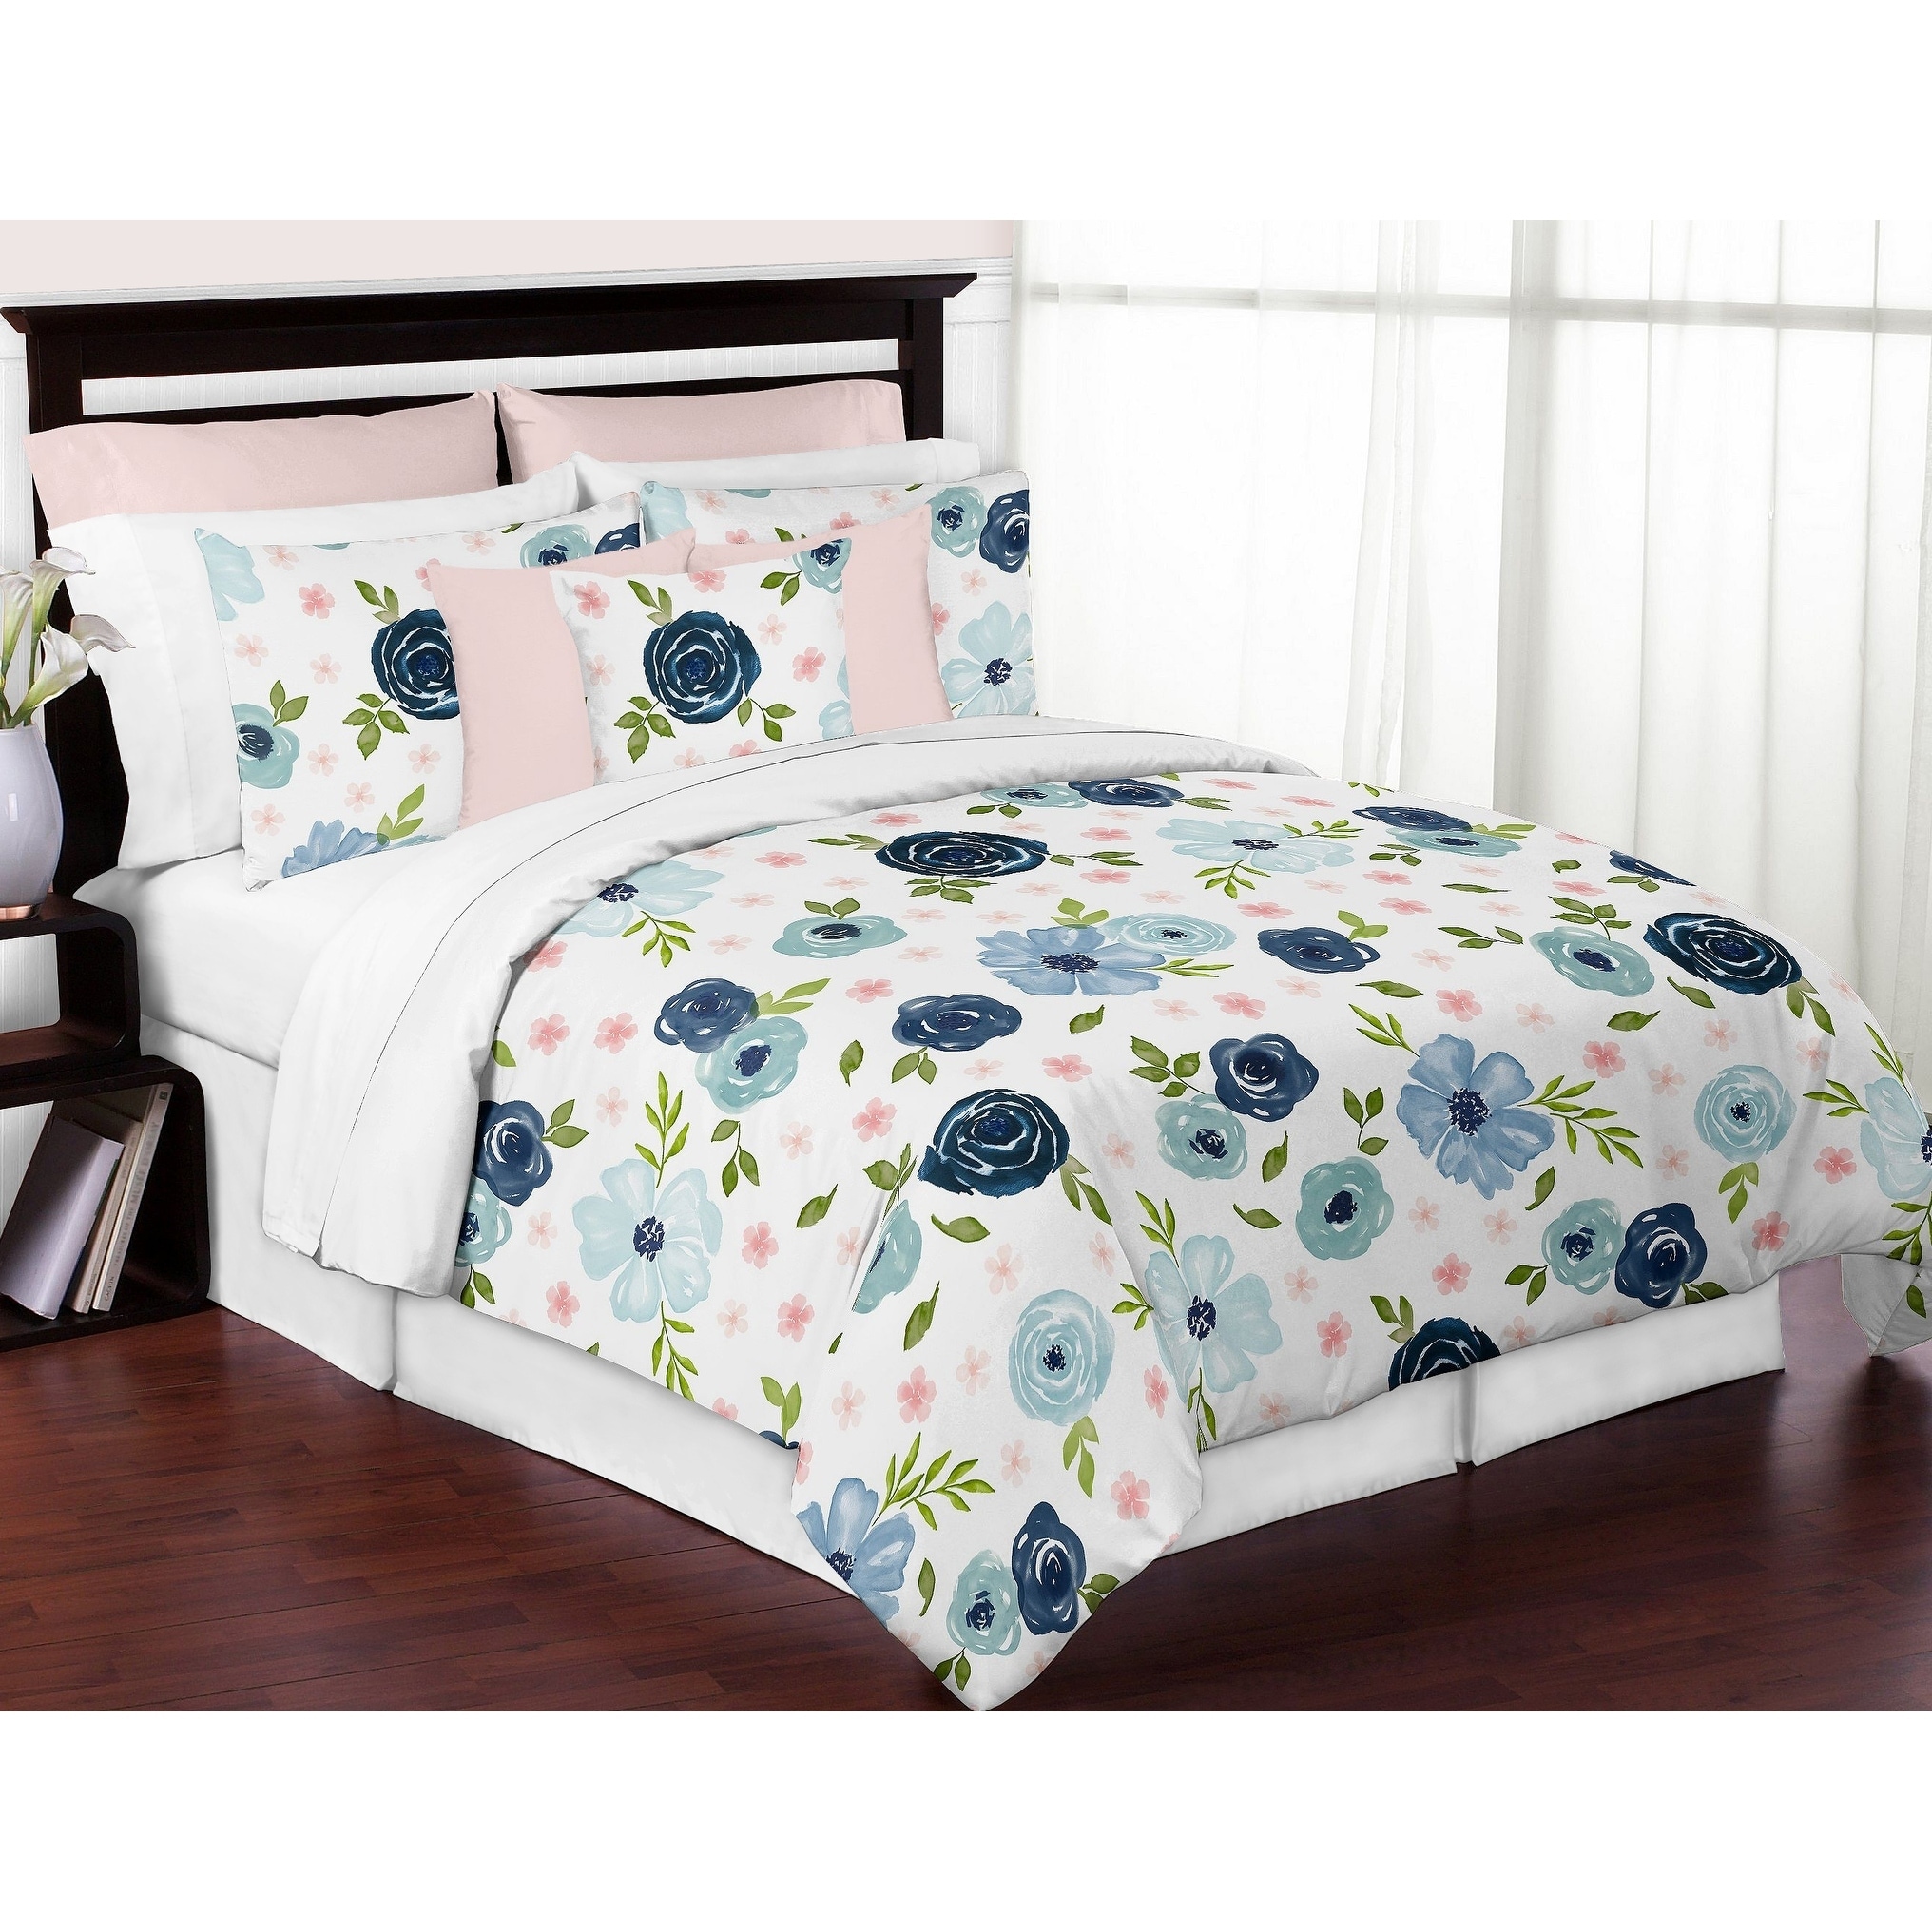 Navy Blue And Pink Watercolor Floral Girl 3pc Full Queen Comforter Set Blush Green White Shabby Chic Flower Overstock 30757357